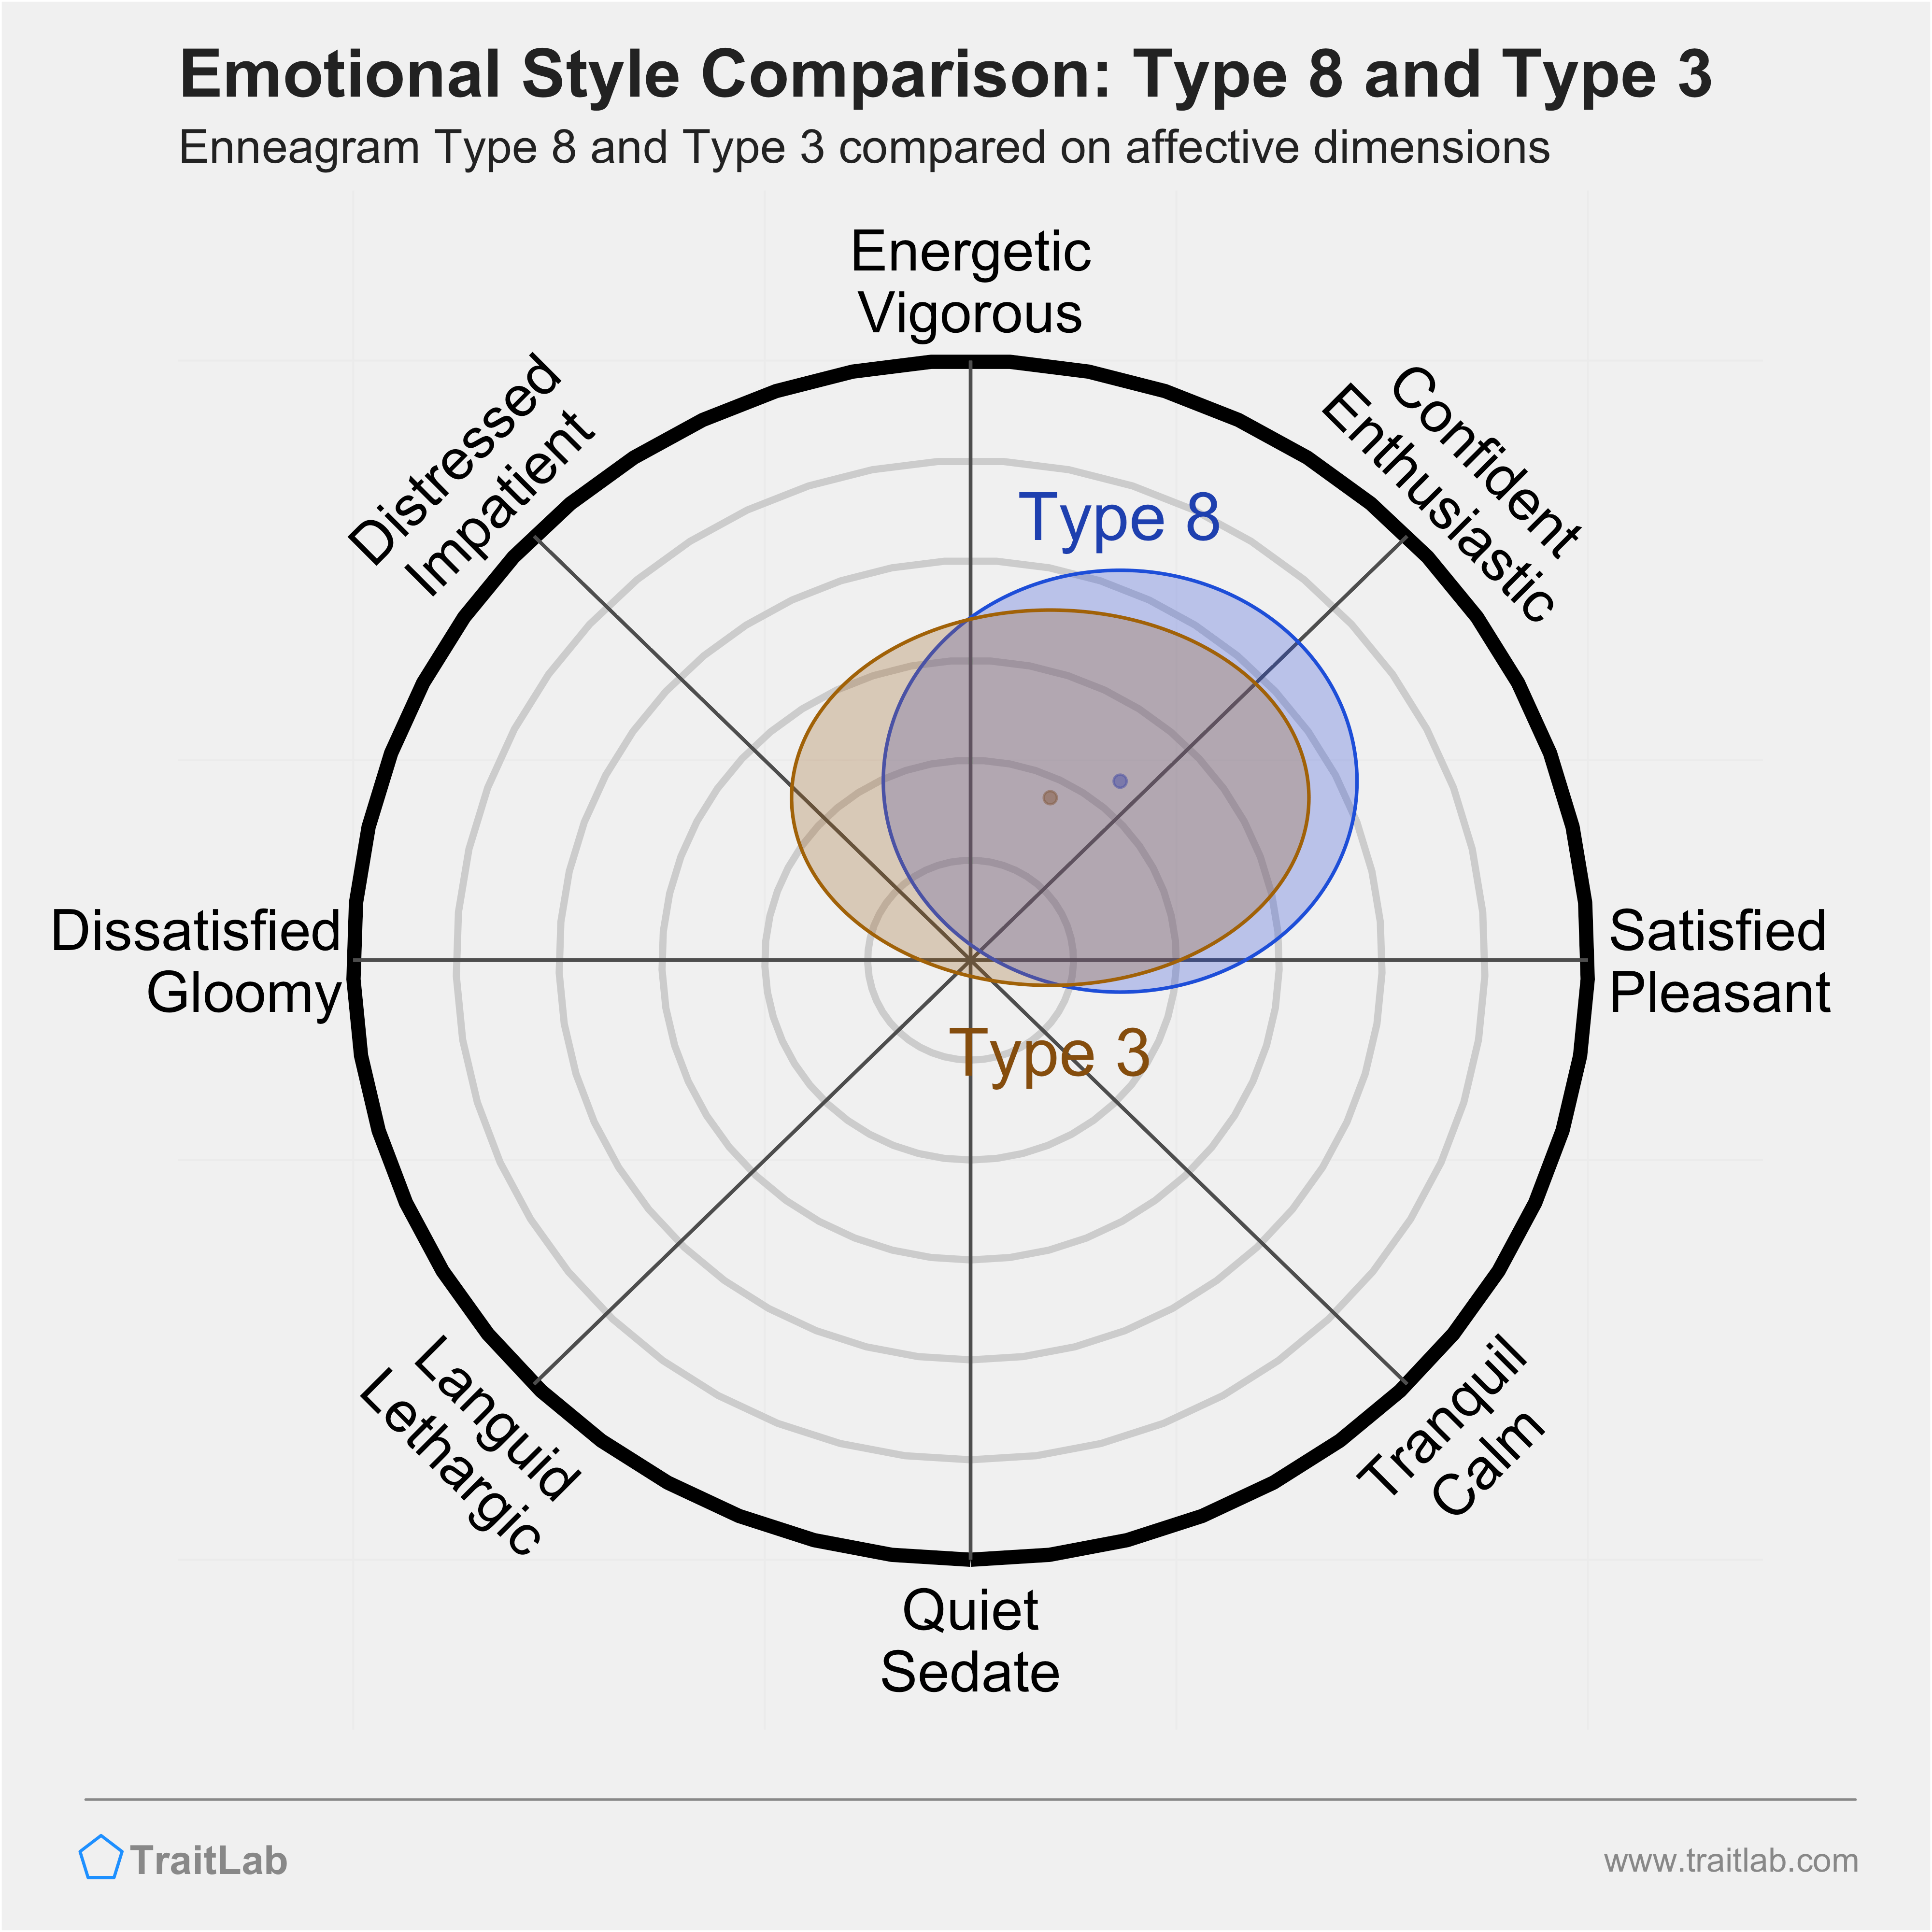 Type 8 and Type 3 comparison across emotional (affective) dimensions